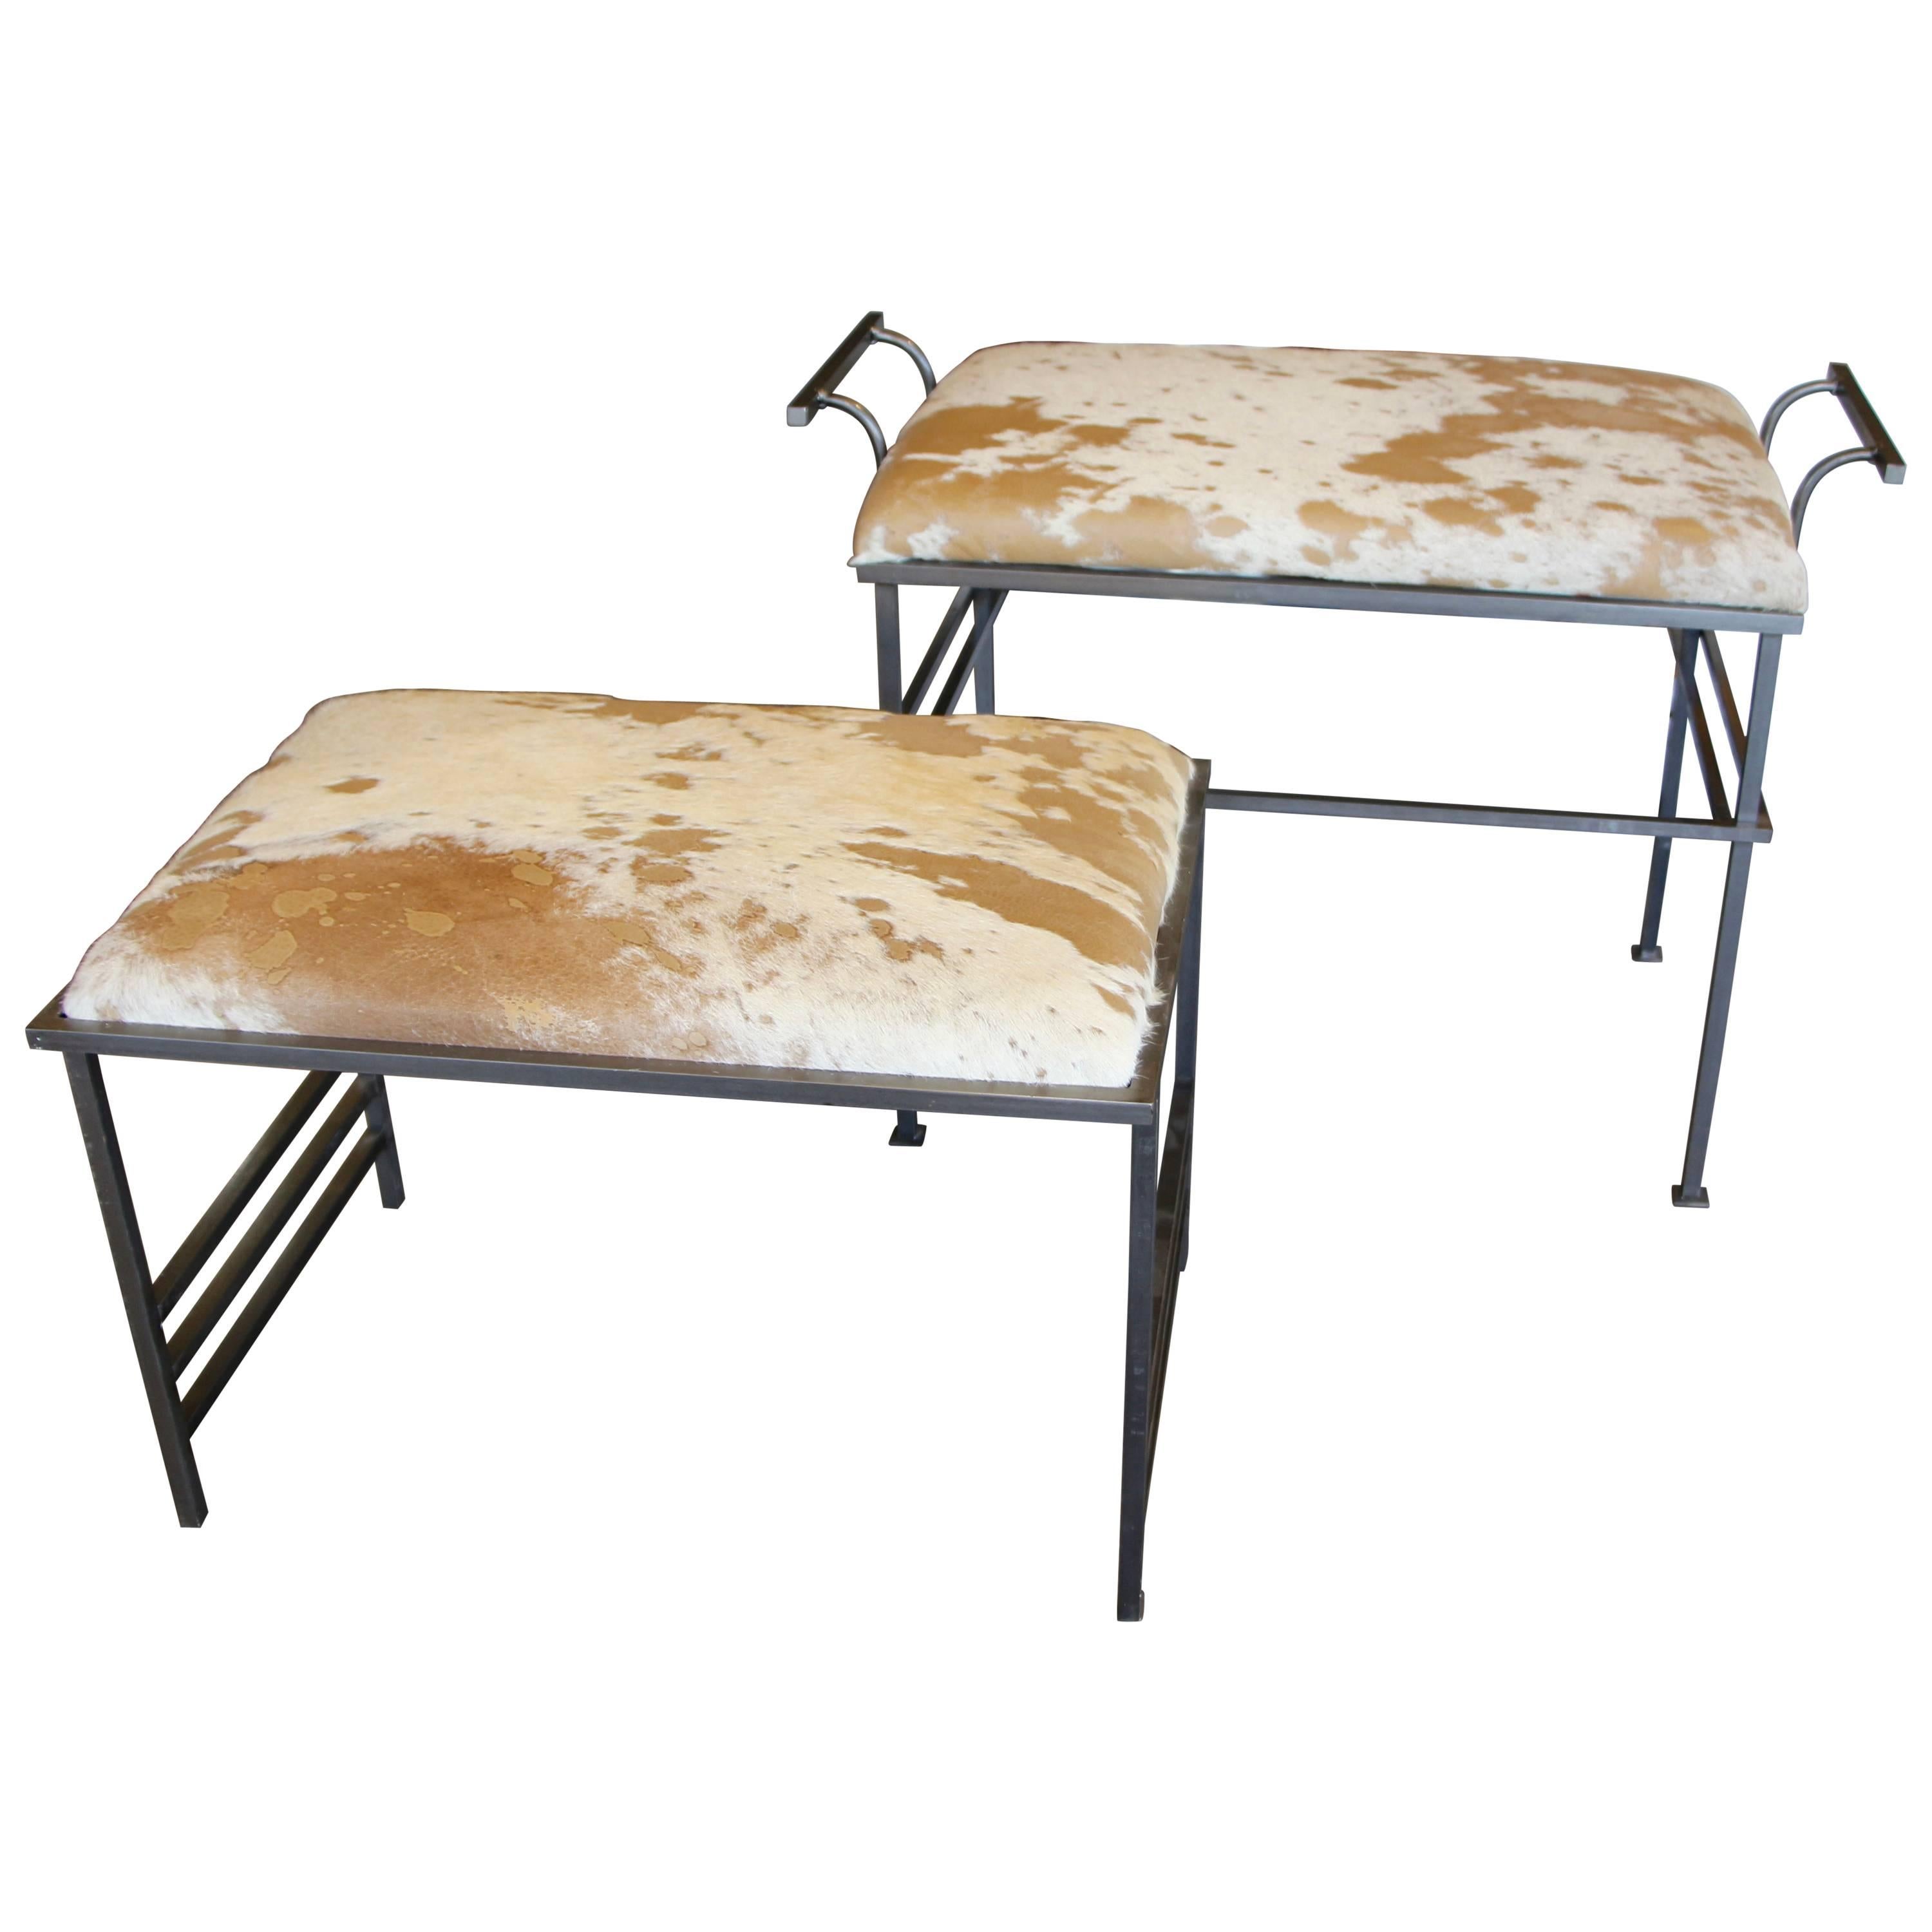 Great Steel Benches with Debrided Hide Seats For Sale